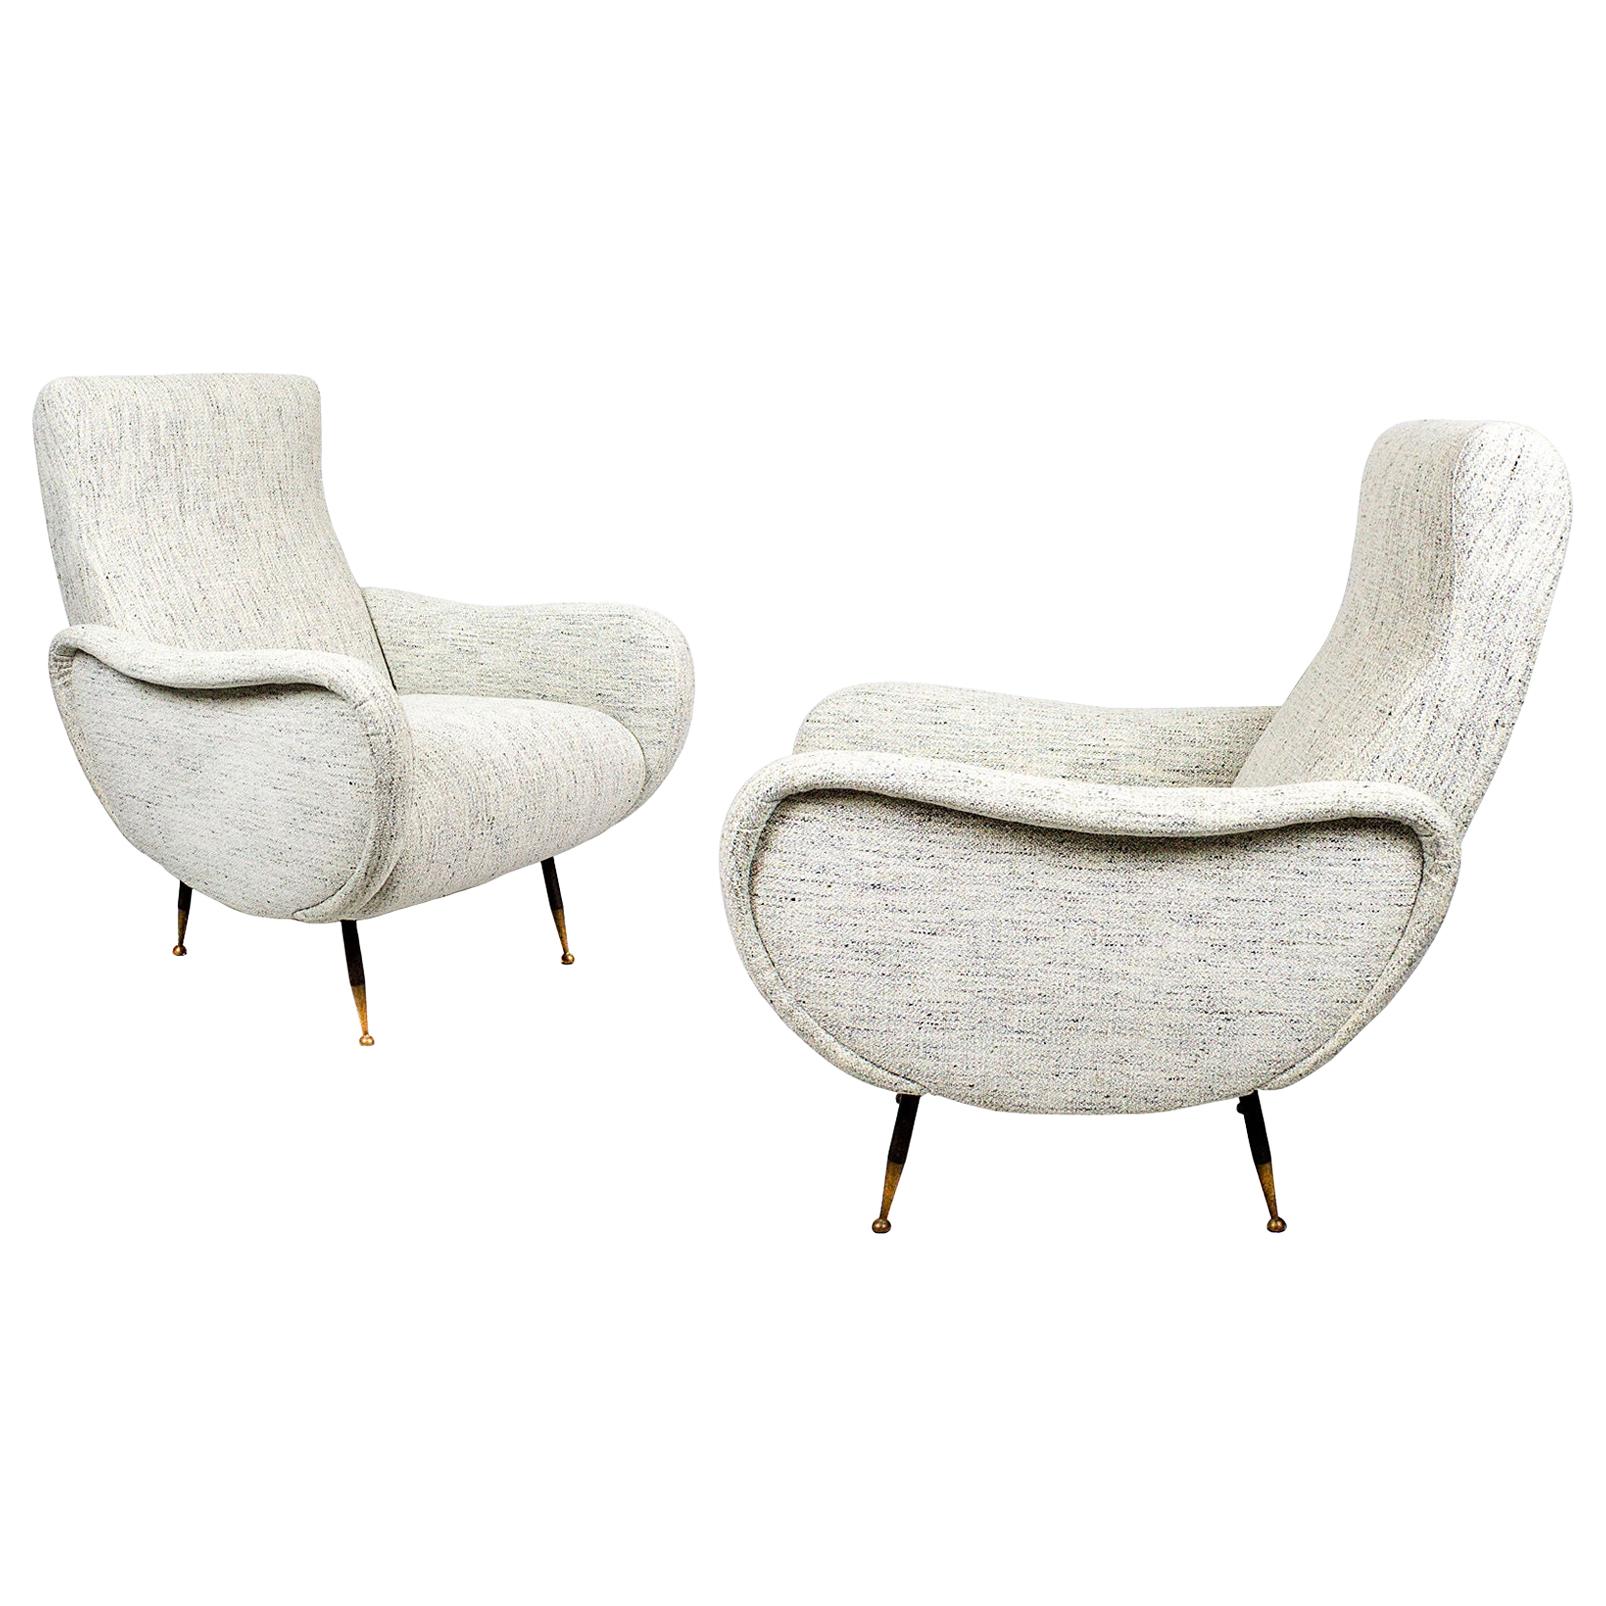 Pair of Mid-Century Modern Armchairs, Steel and Brass, Flecked Fabric - Italy